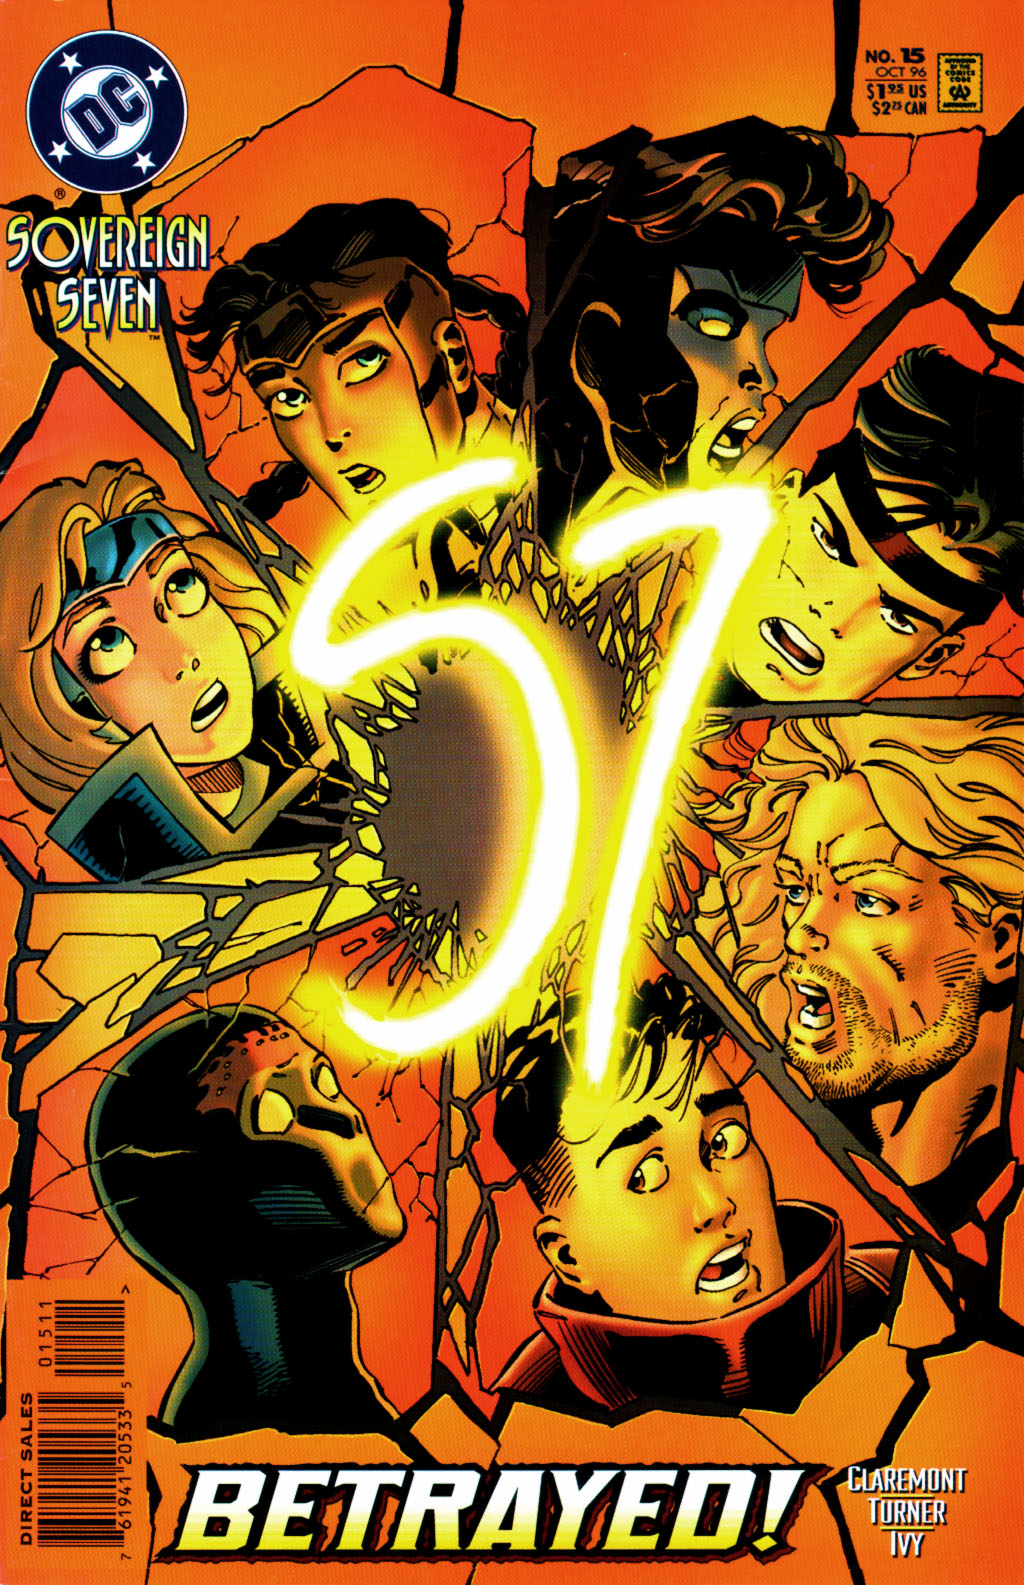 Read online Sovereign Seven comic -  Issue #15 - 2